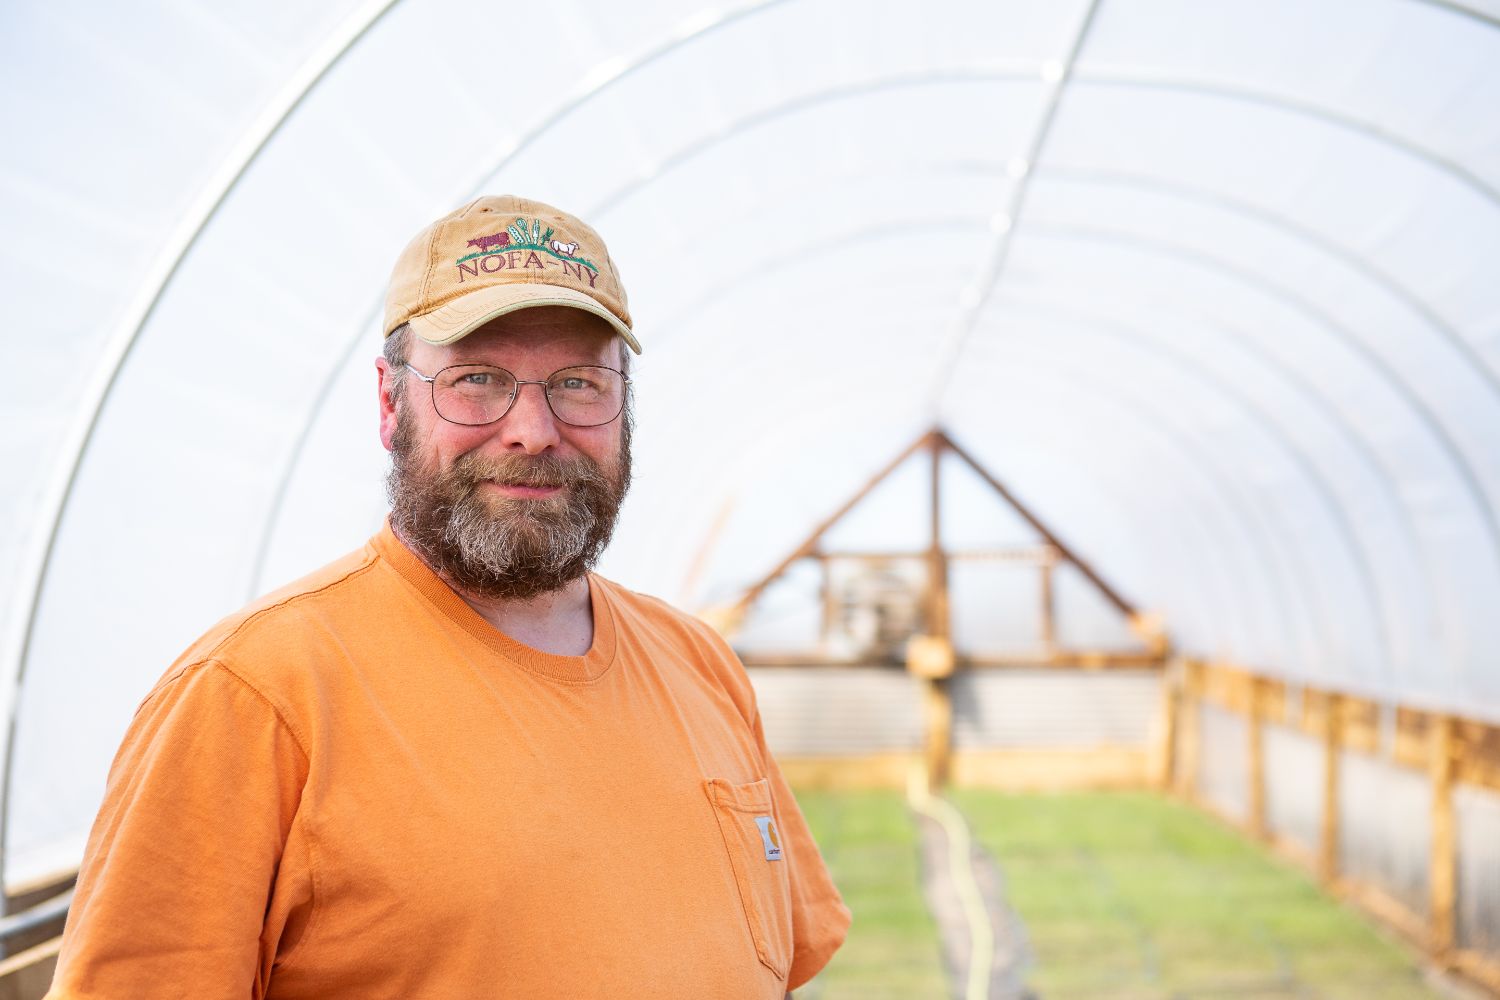 Kent Miller, owner of Plato Dale Farm in Arcade, NY | Edible Western NY